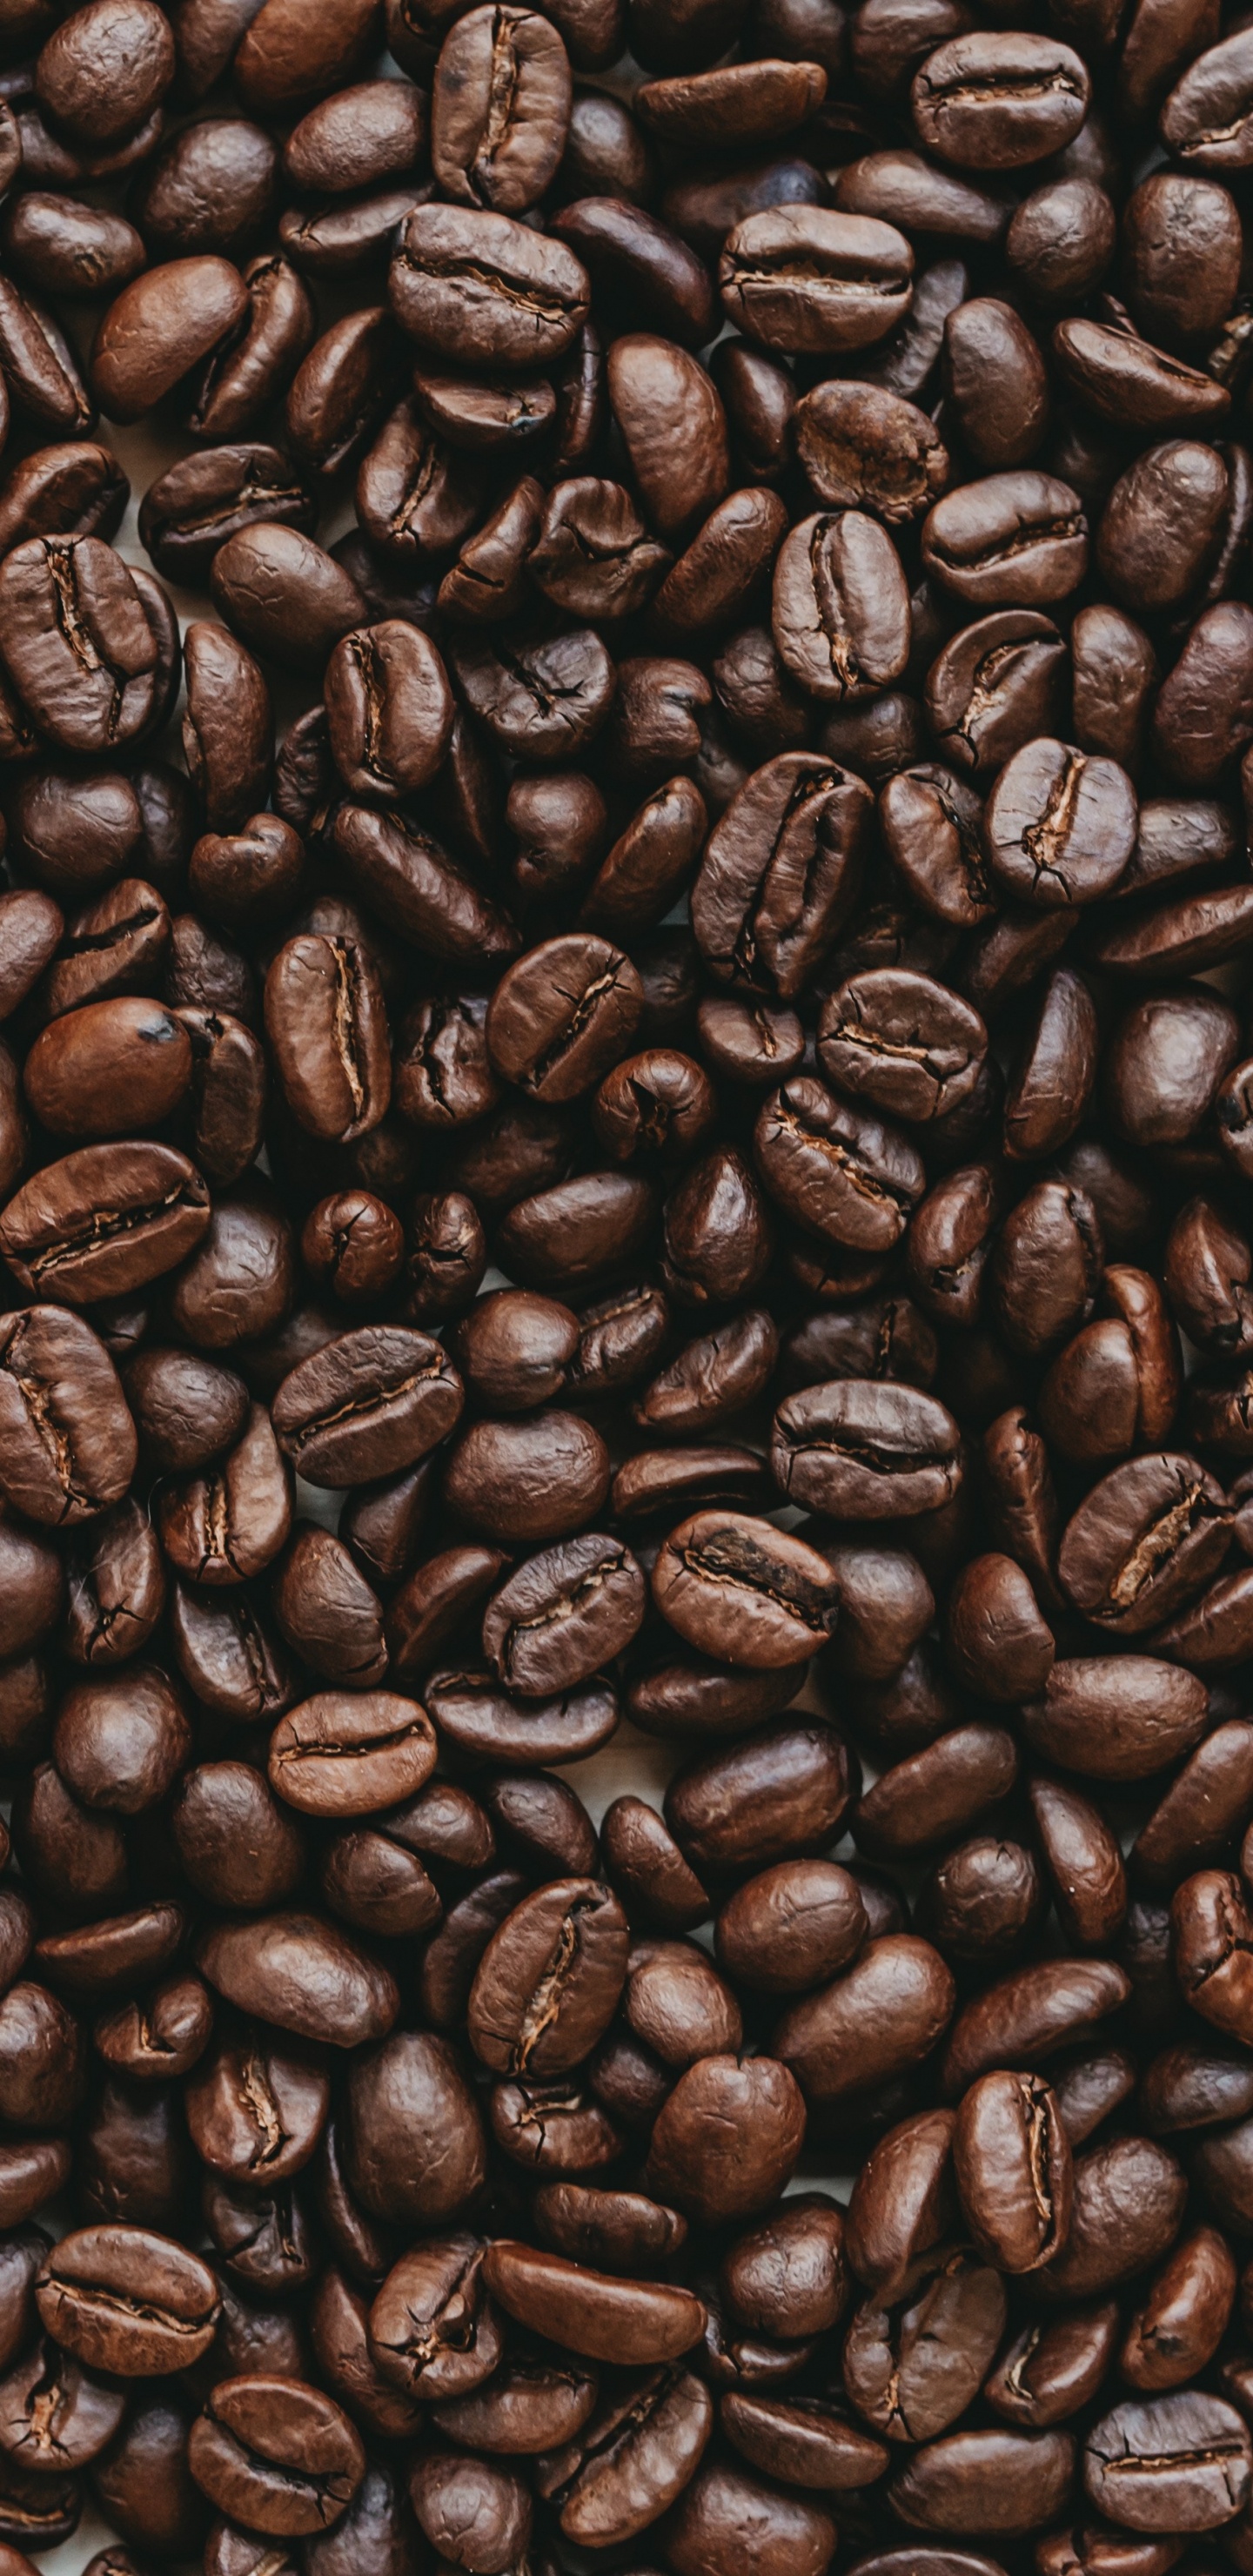 Coffee Beans on Brown Wooden Surface. Wallpaper in 1440x2960 Resolution